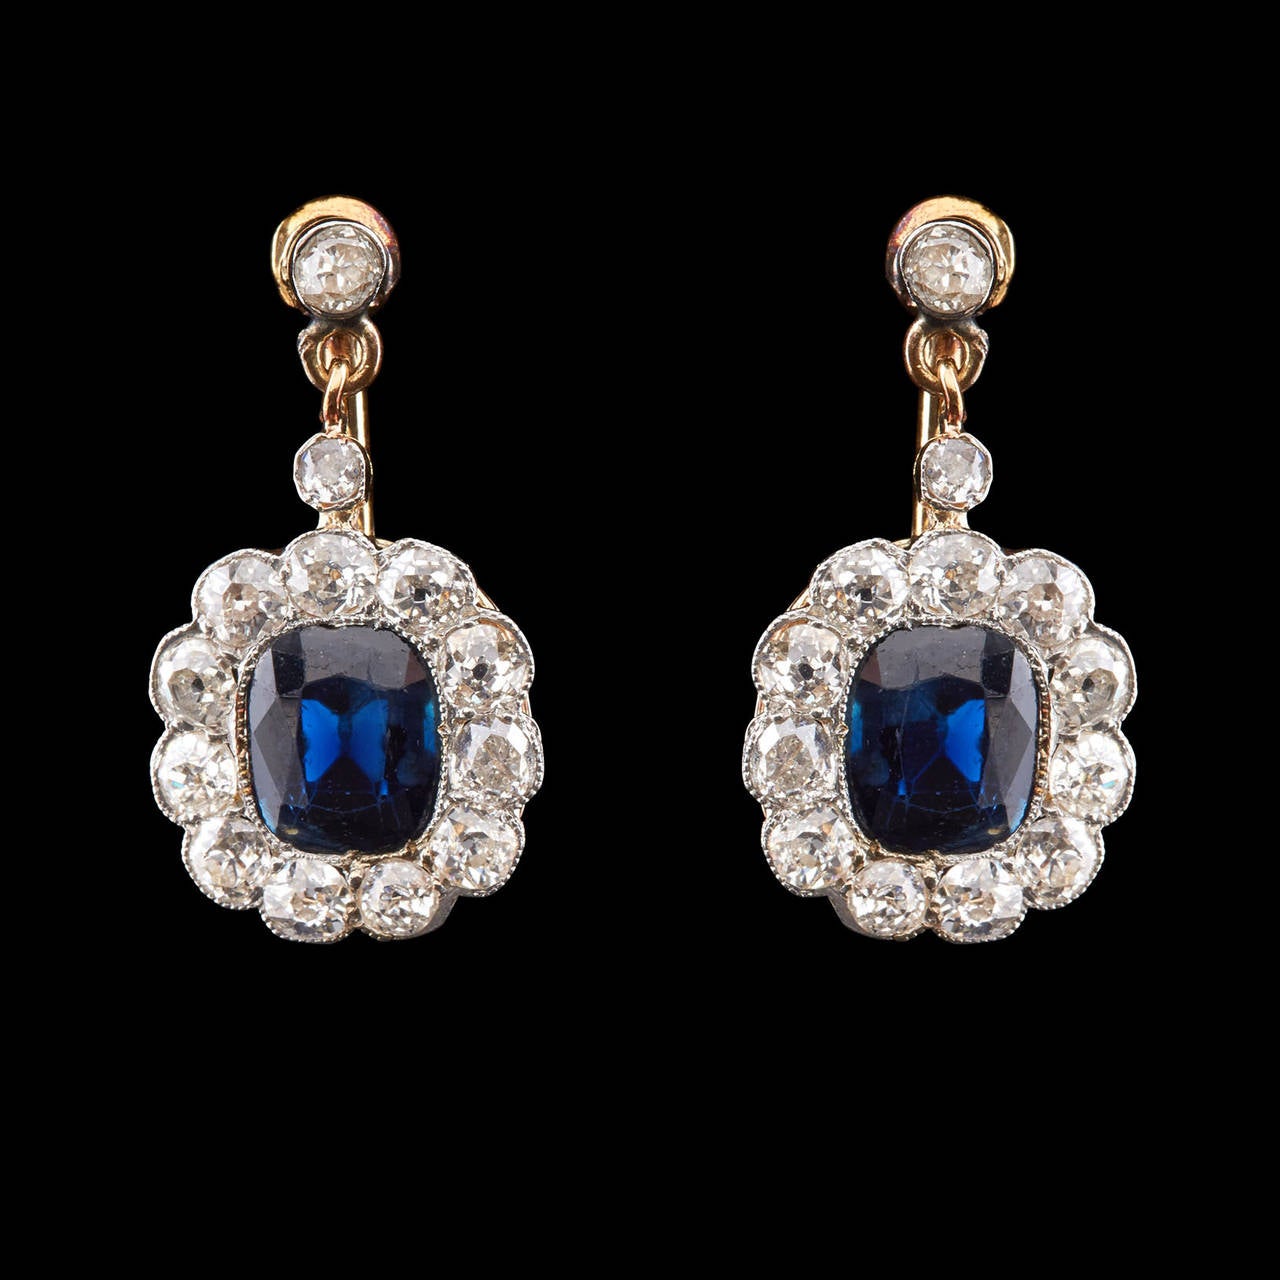 14Kt Yellow Gold Dangle Screwback Earrings features Cushion Cut Blue Sapphires totaling 2.50 carats surrounded by 13 Old Mine Cut Diamonds totaling 1.84 carats. The total length is 0.88″ and 0.50″ wide. Total item weight is 4.9 grams.